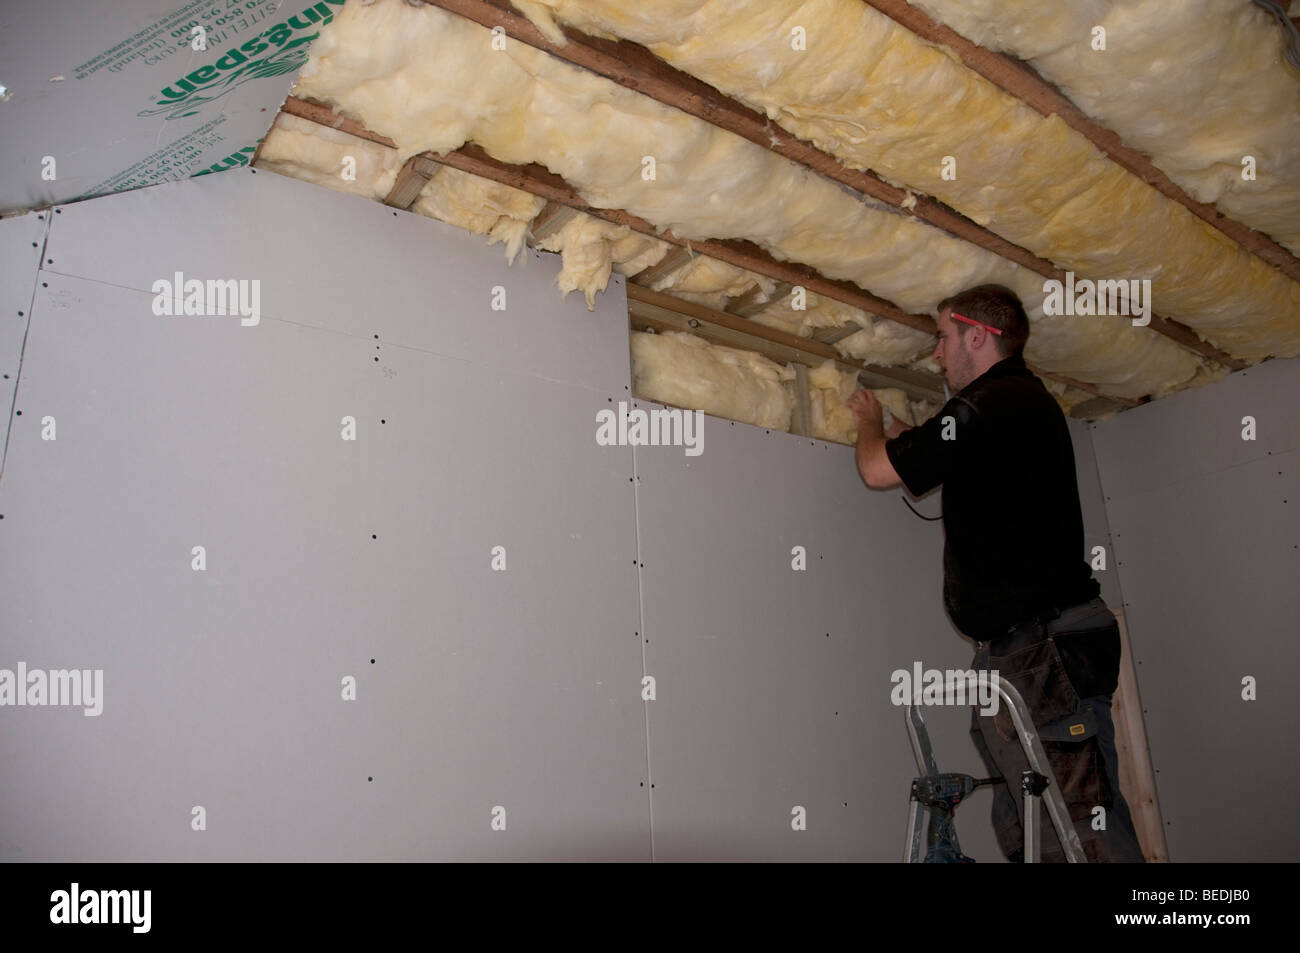 Fitting fibreglass insulation in stud wall and ceiling without safety goggles or mask Stock Photo